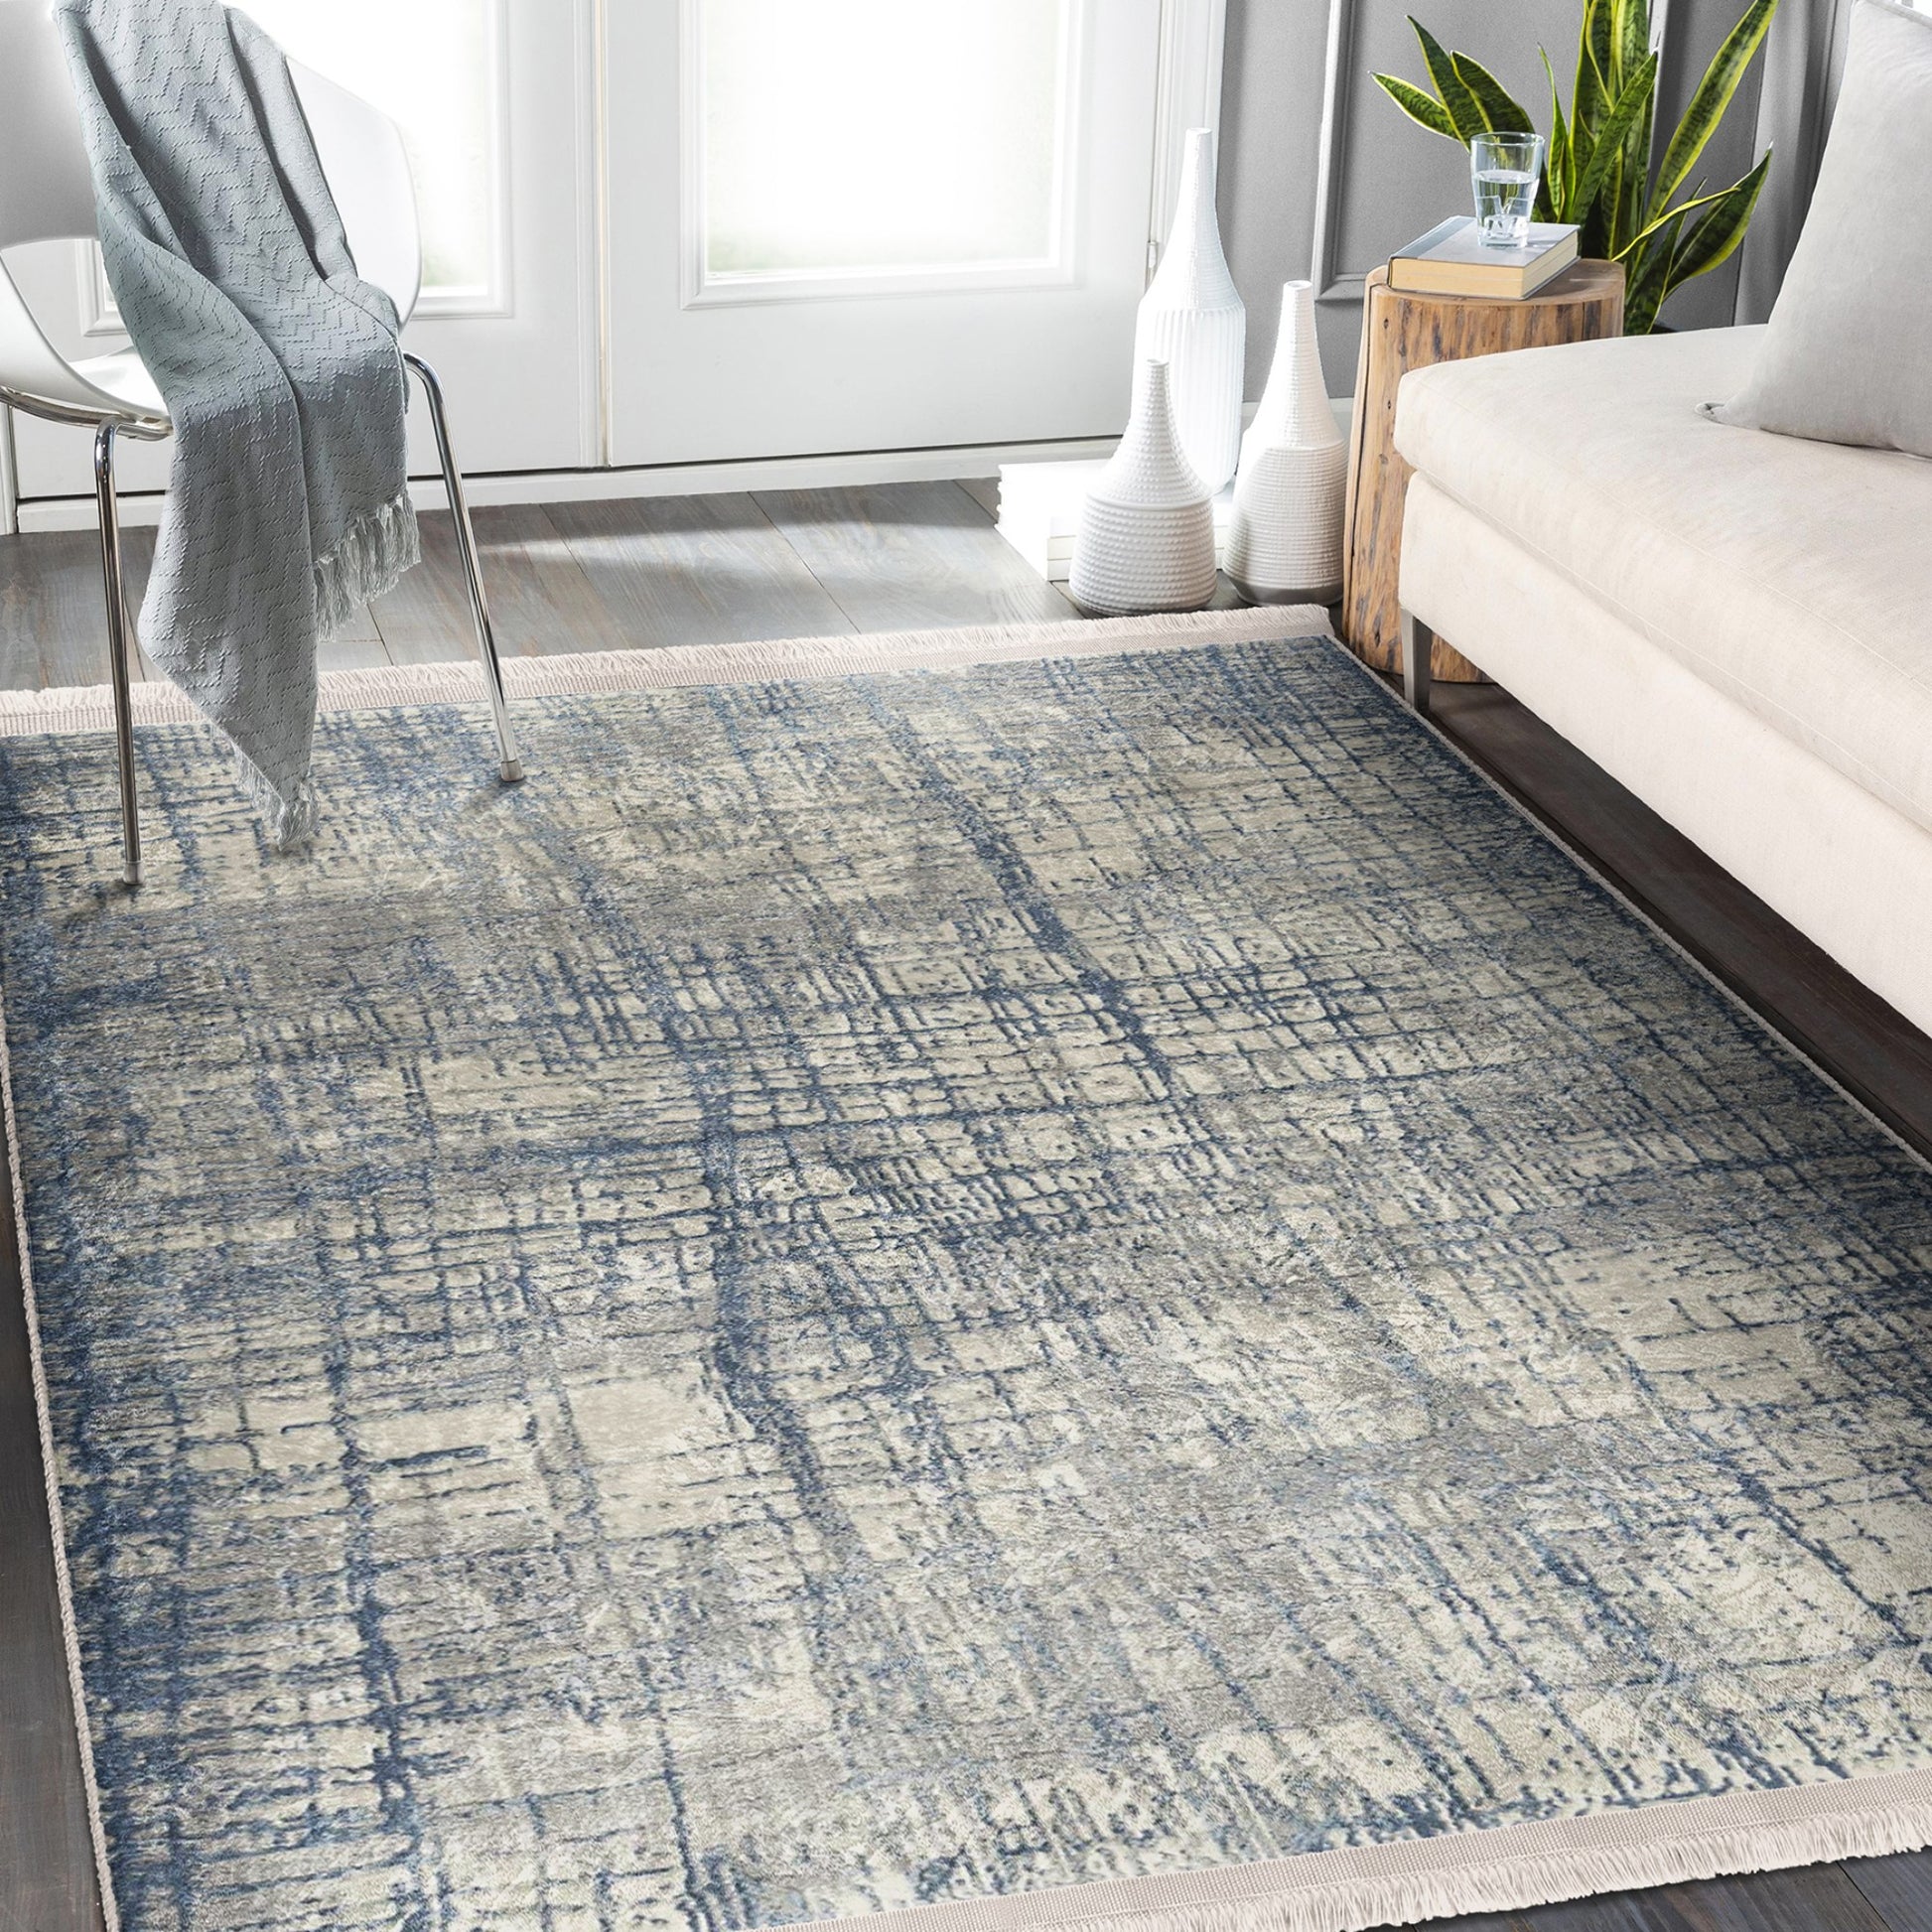 Functional and Stylish Area Rug for a Harmonious Living Space